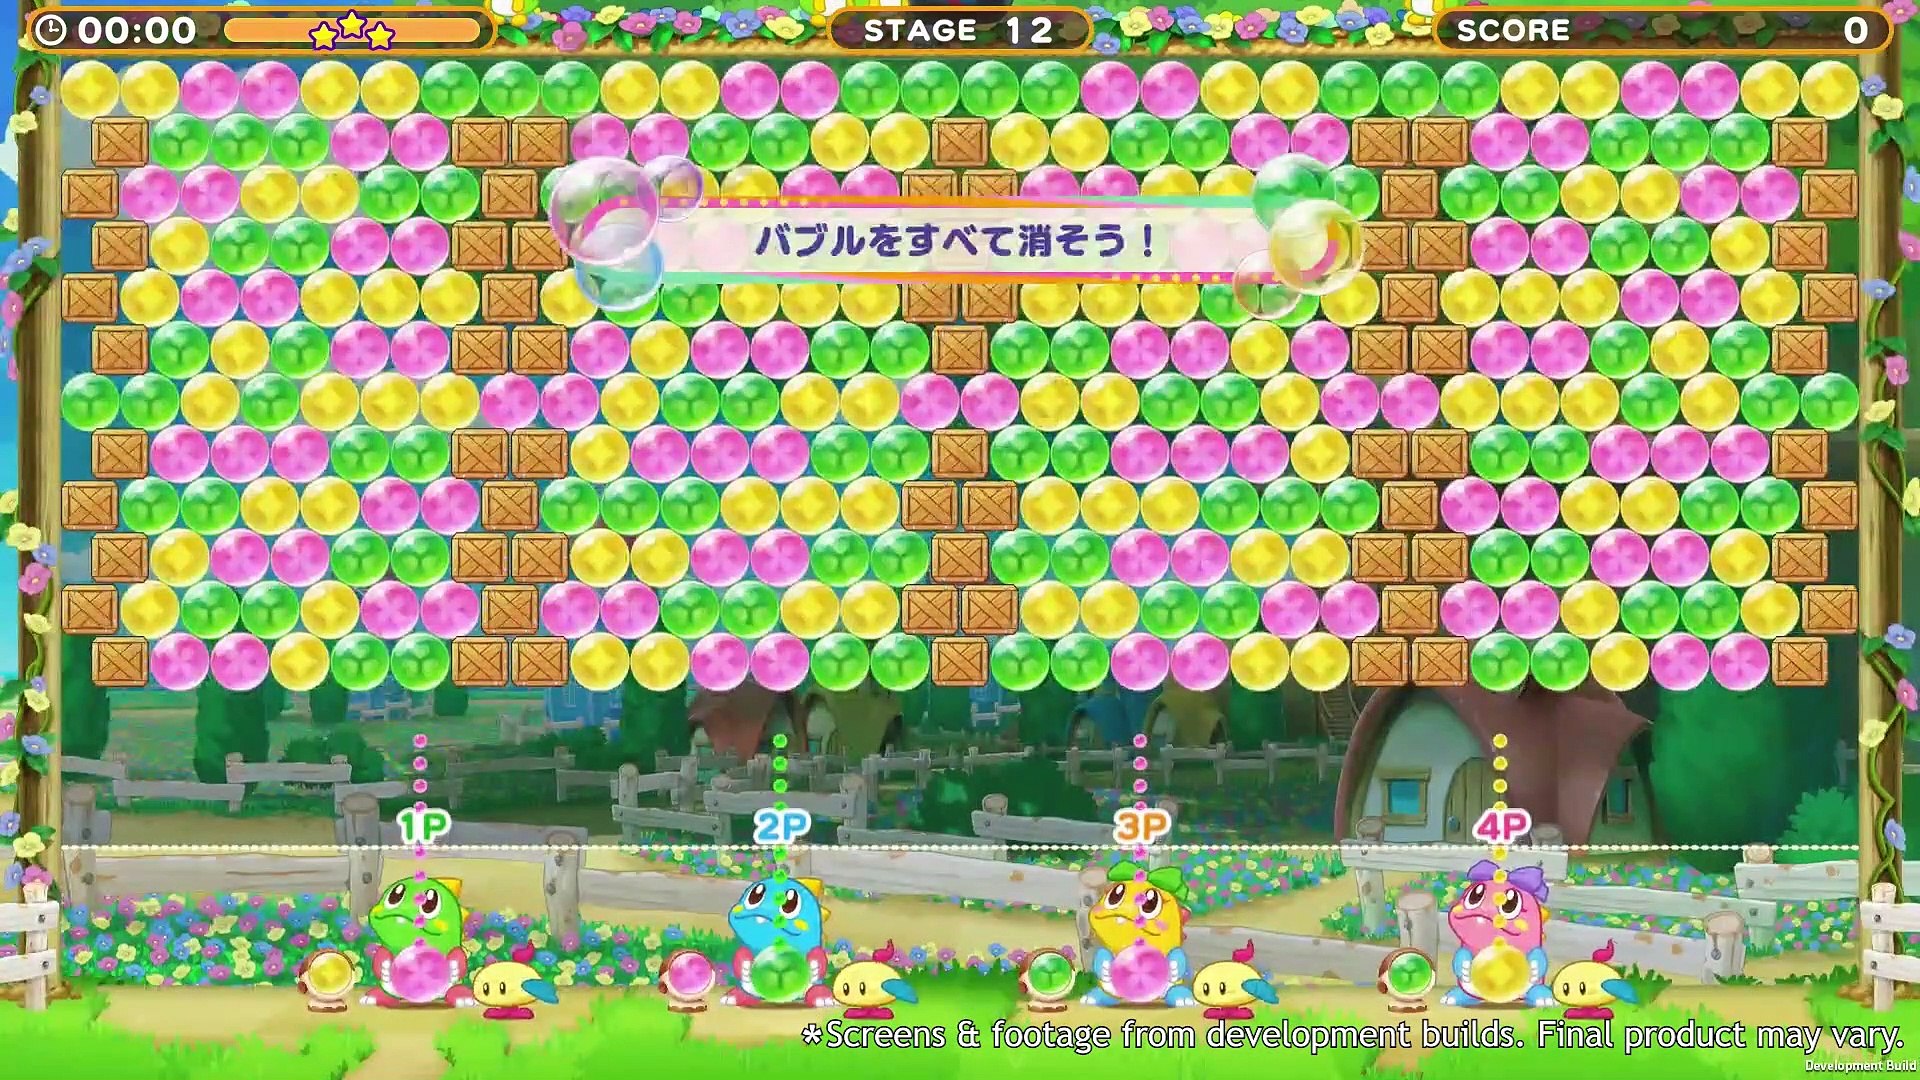 Puzzle Bobble Everybubble! First Gameplay Impression - video